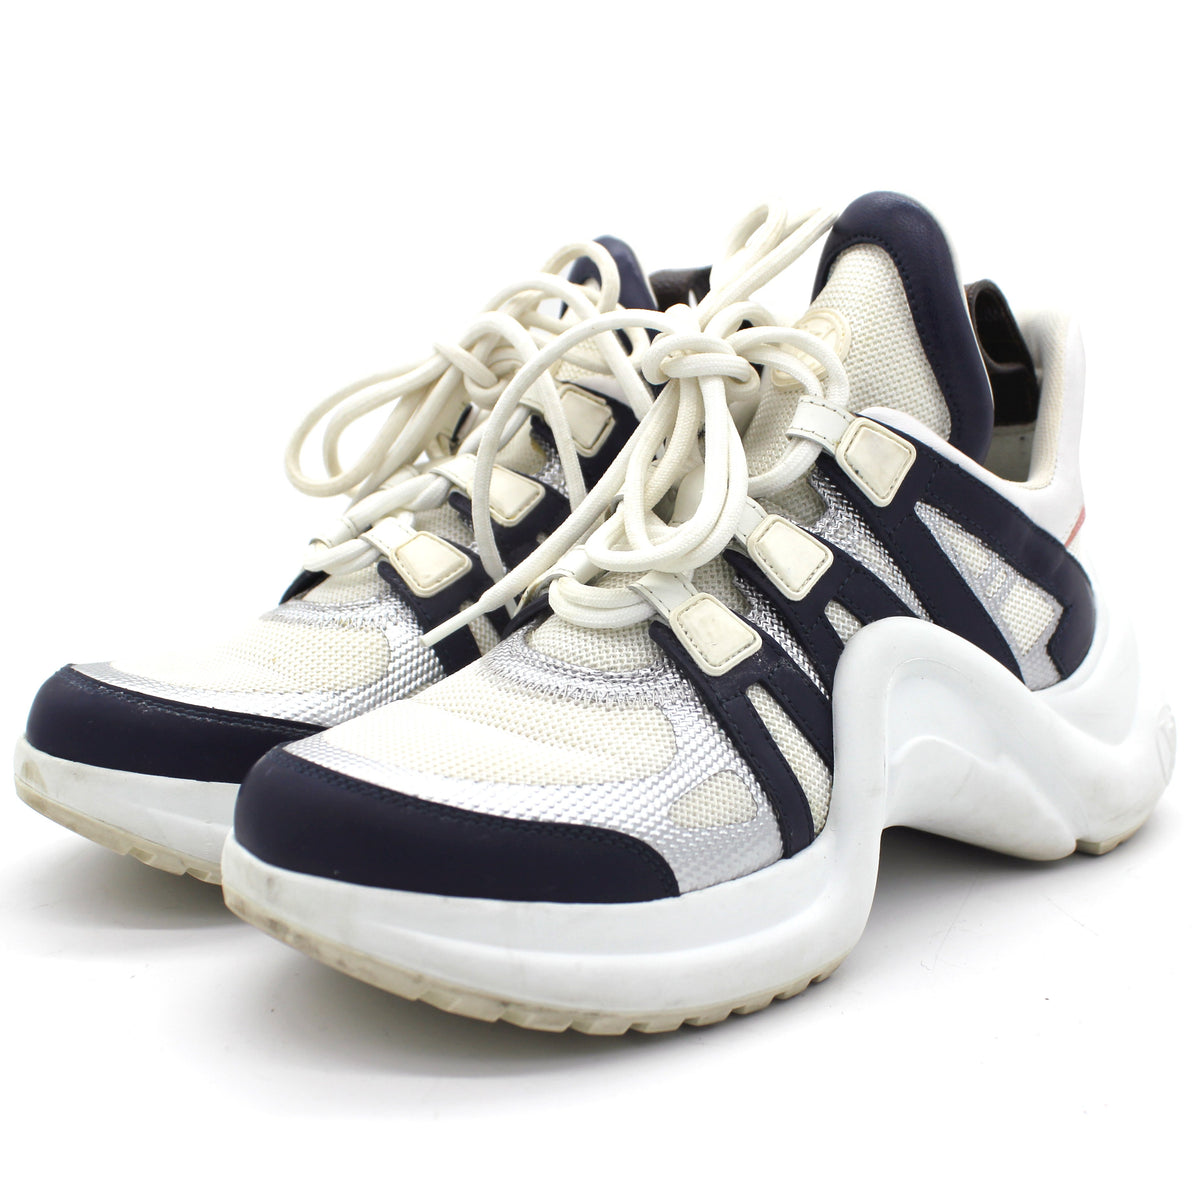 Louis Vuitton Archlight cloth trainers - ShopStyle Sneakers & Athletic Shoes